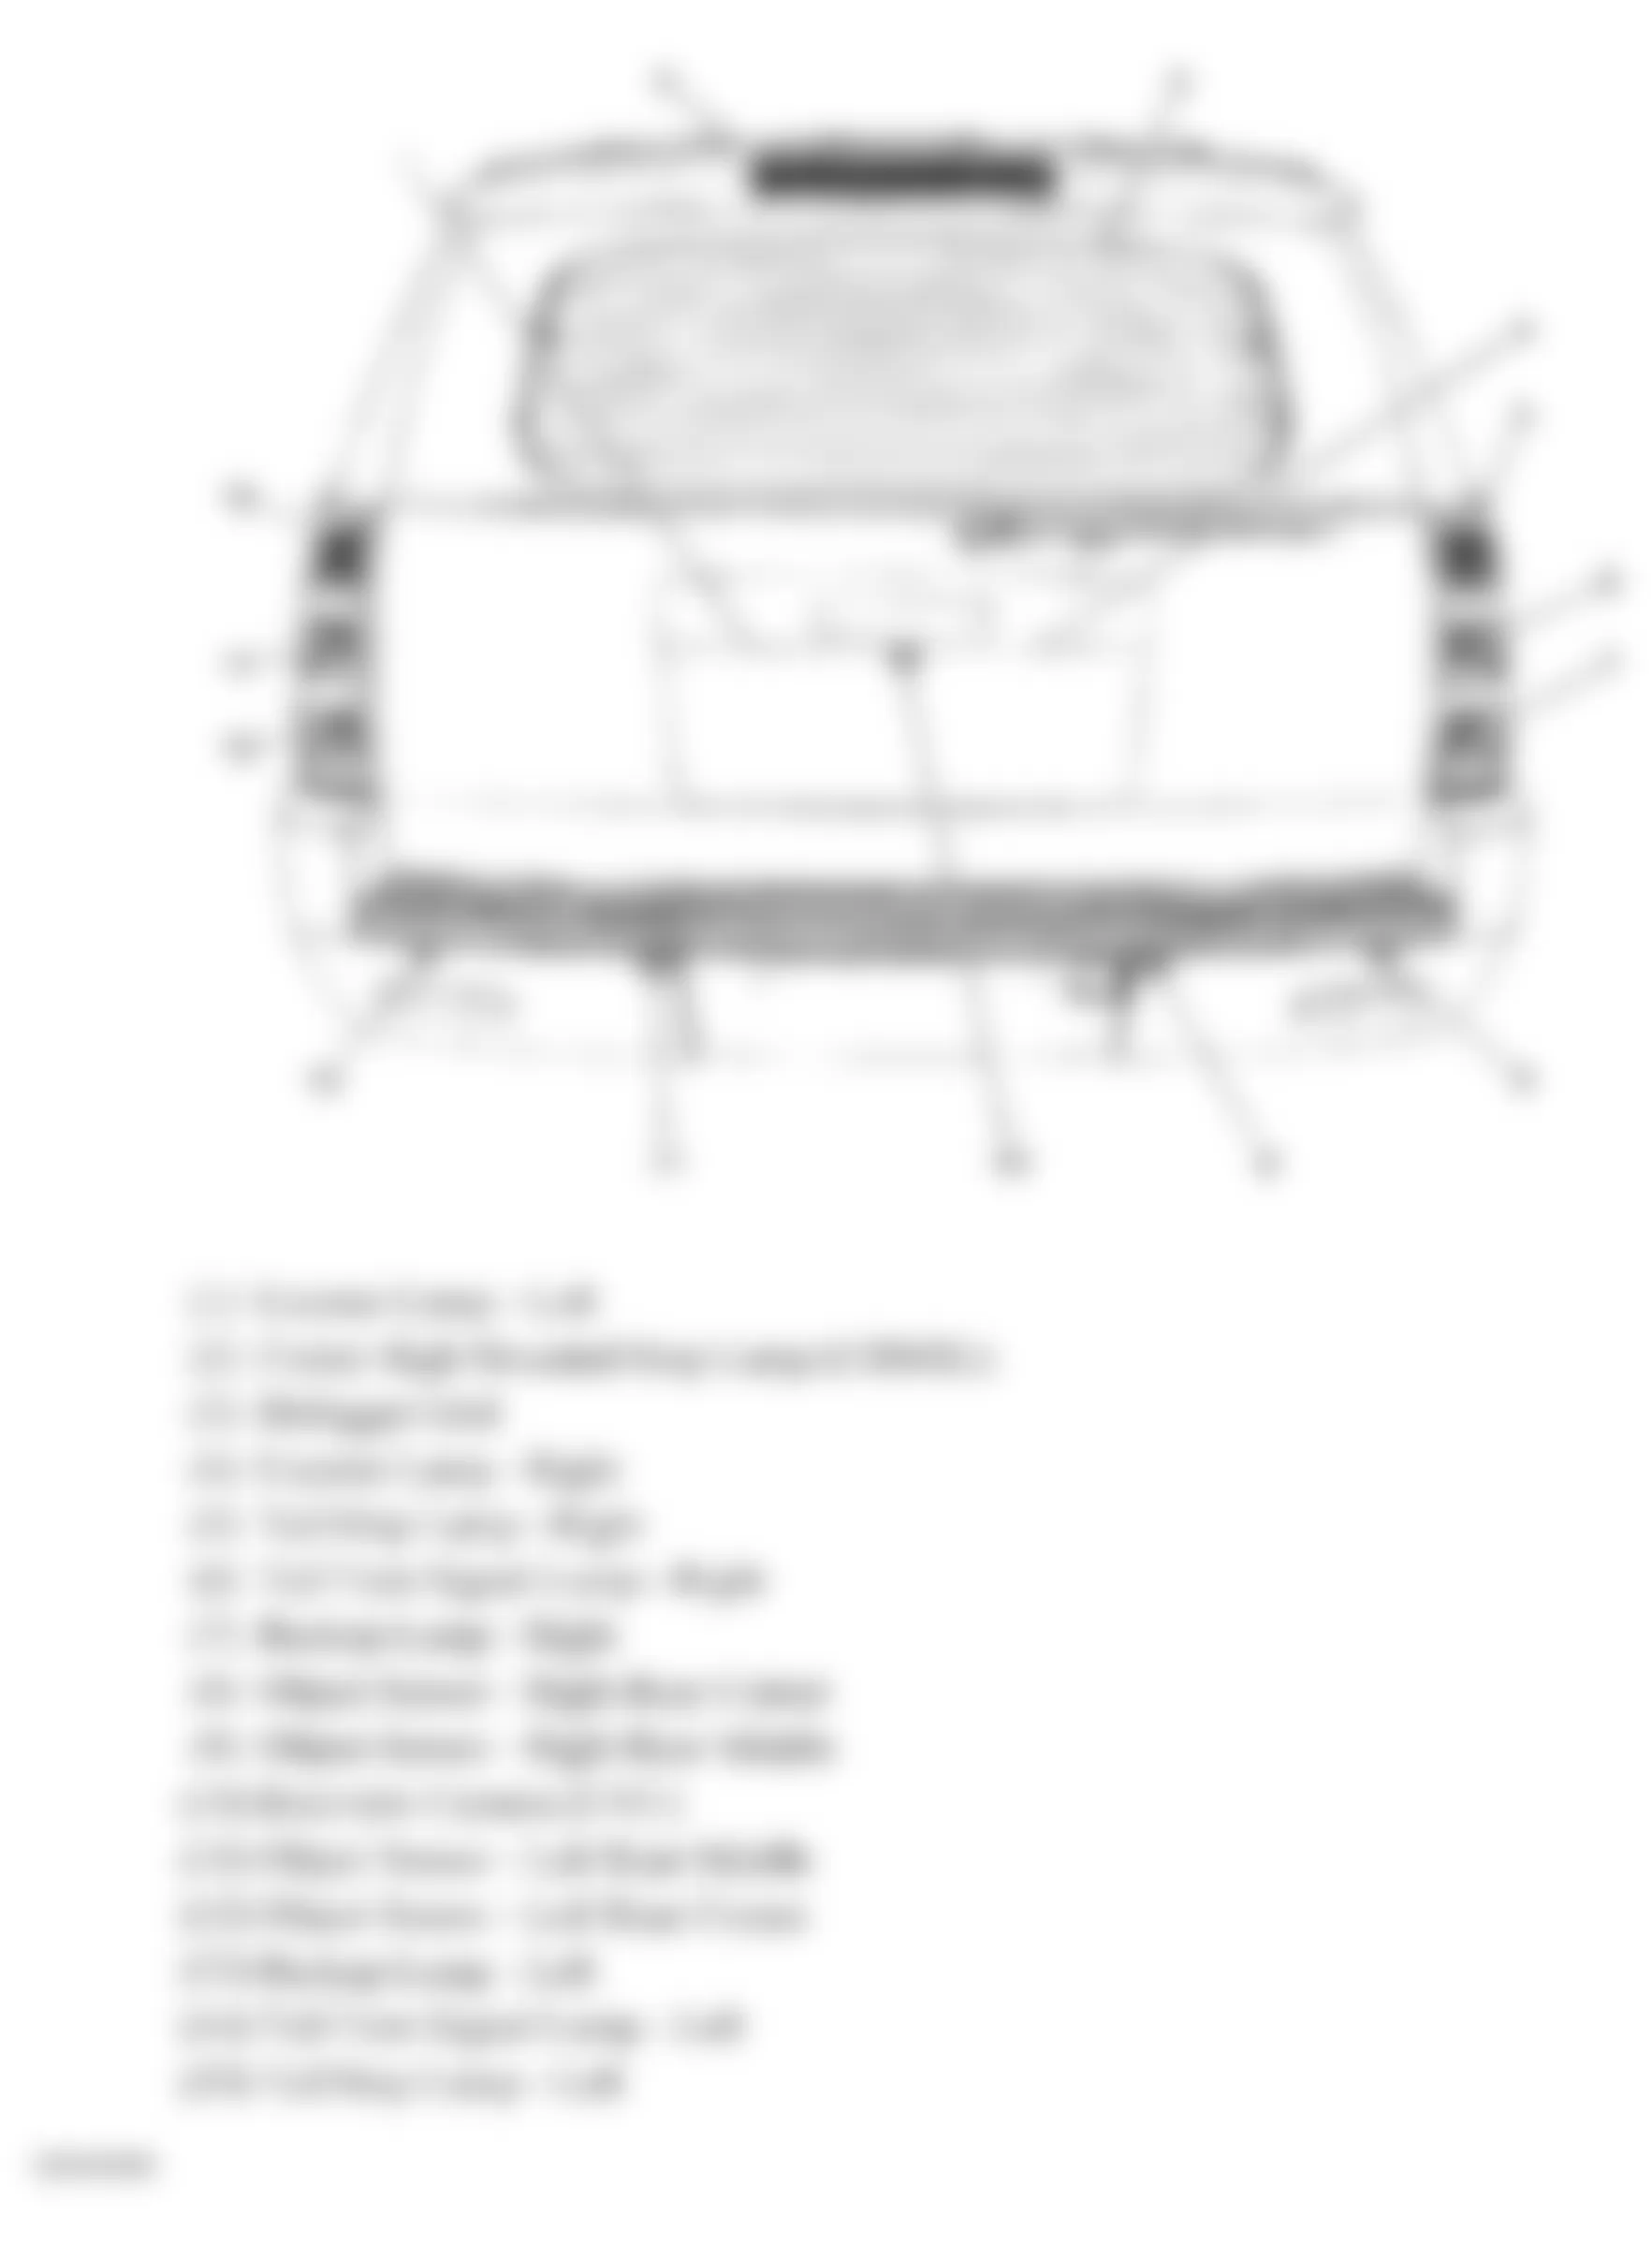 Chevrolet Suburban K1500 2009 - Component Locations -  Rear Of Vehicle (Yukon W/One Piece Liftgate)